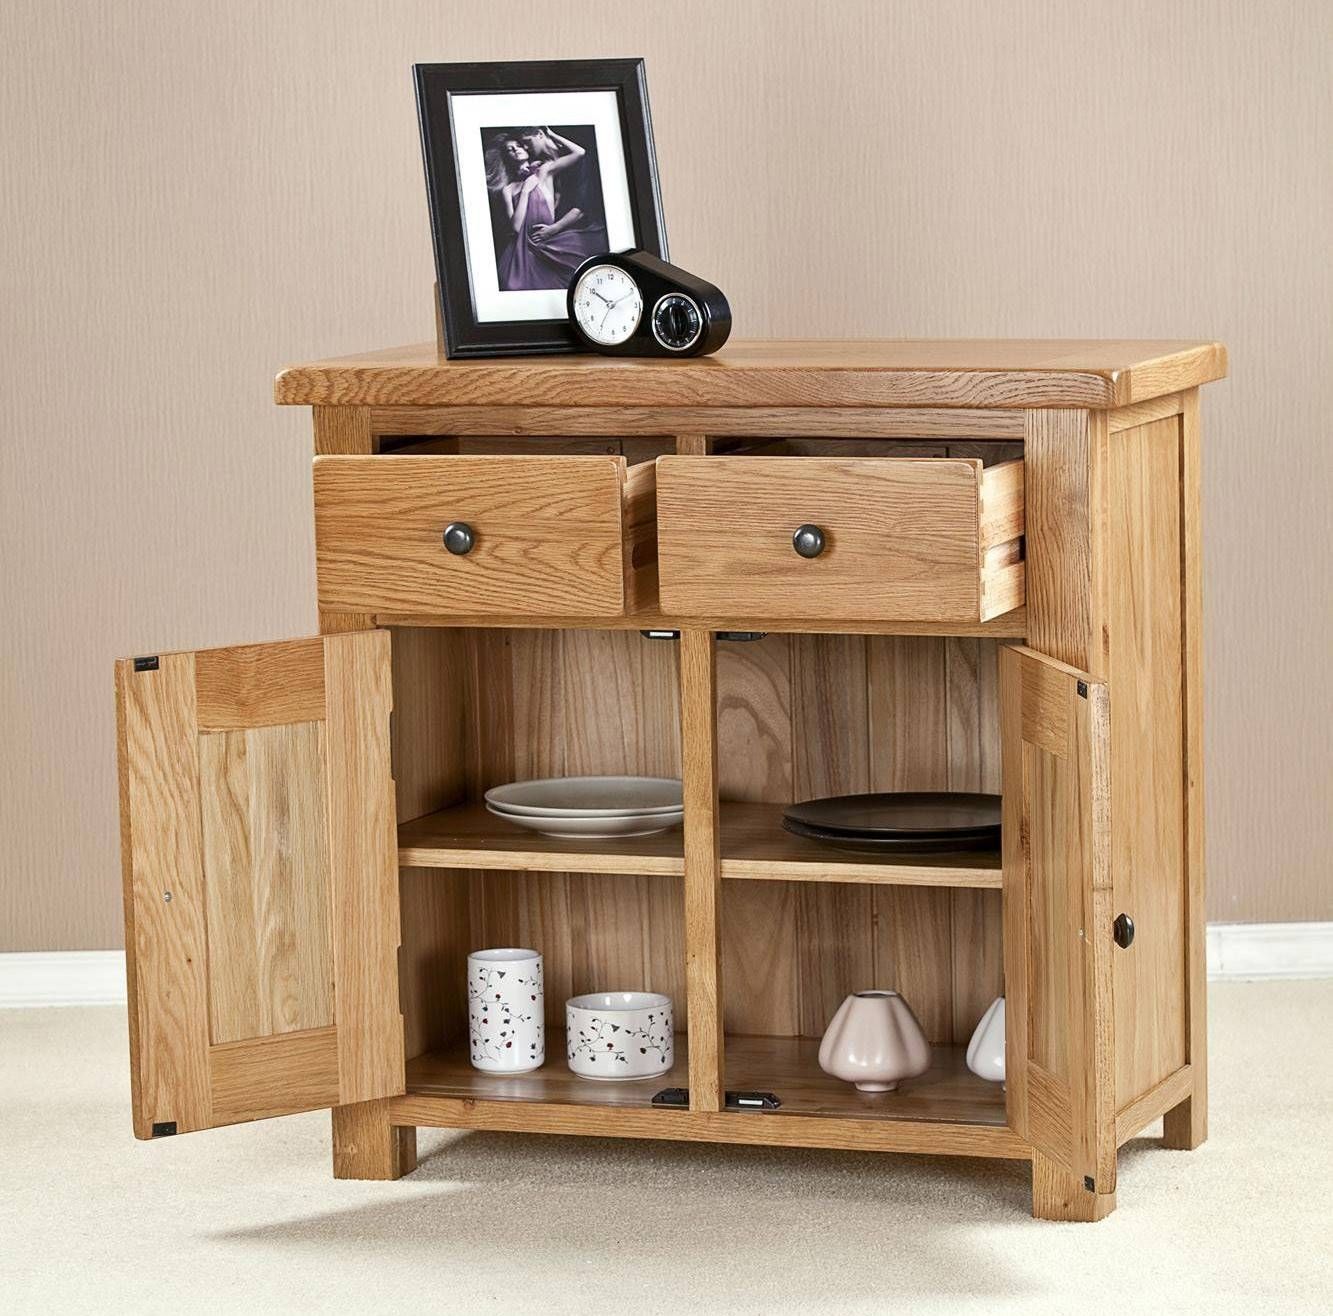 Cotswold Solid Oak 2 Door 2 Drawer Small Sideboard Pertaining To Oak Sideboards For Sale (View 14 of 15)